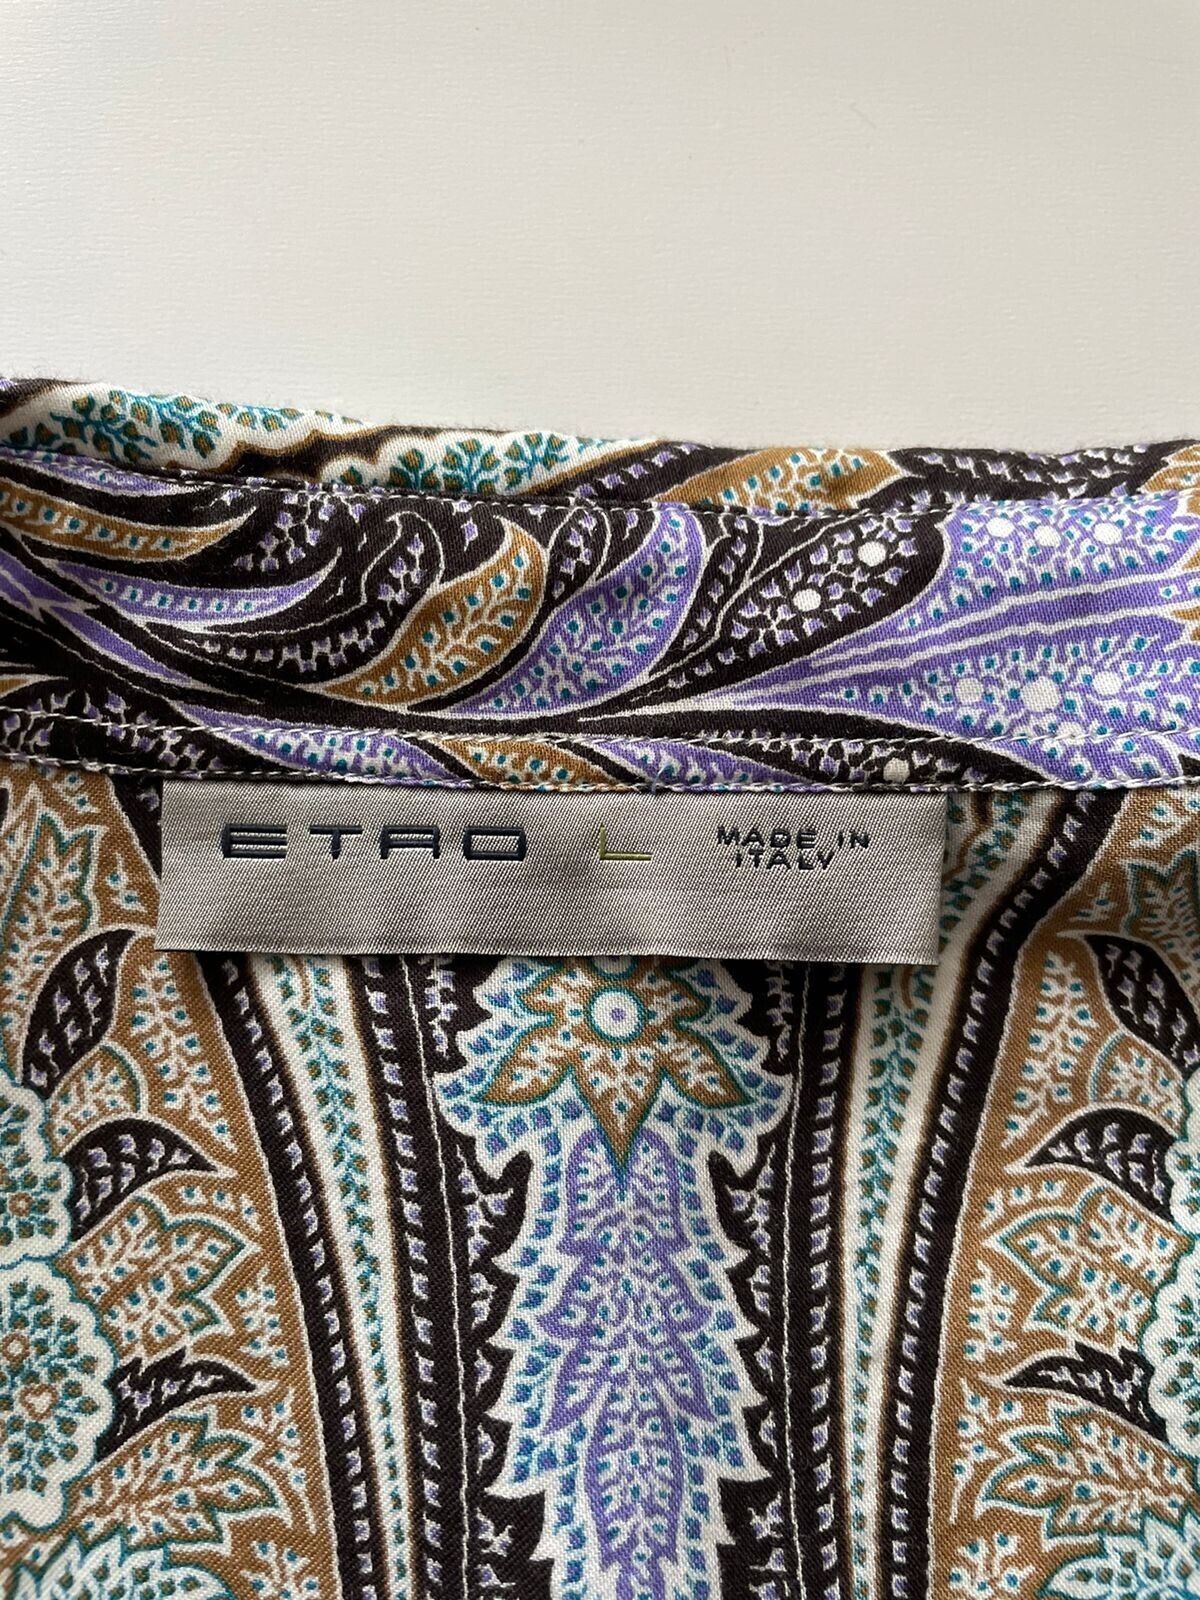 ETRO Men's  Casual Button-up Cotton Shirt Large Made in Italy